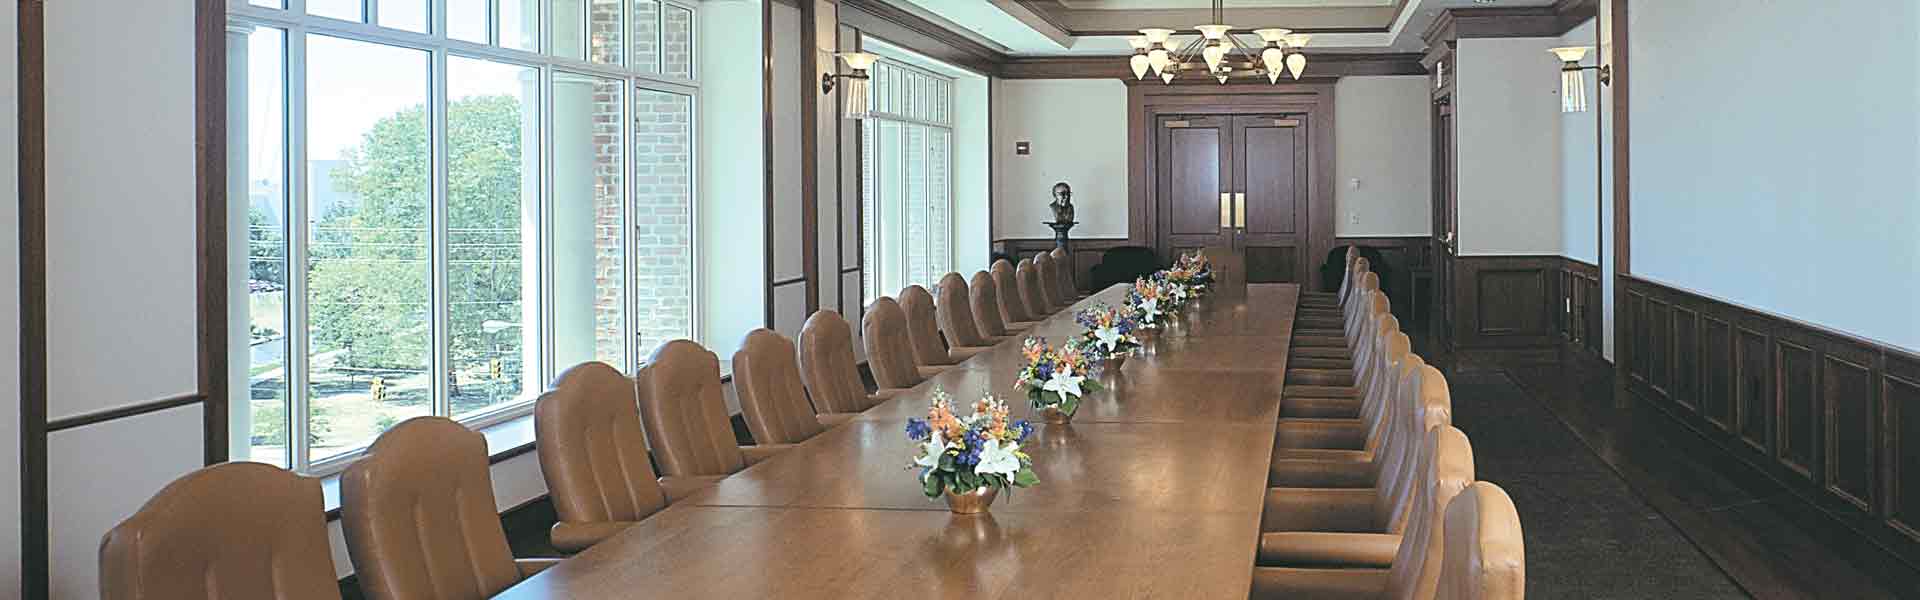 Board Room with long table with chairs. Bordered on left with windows.